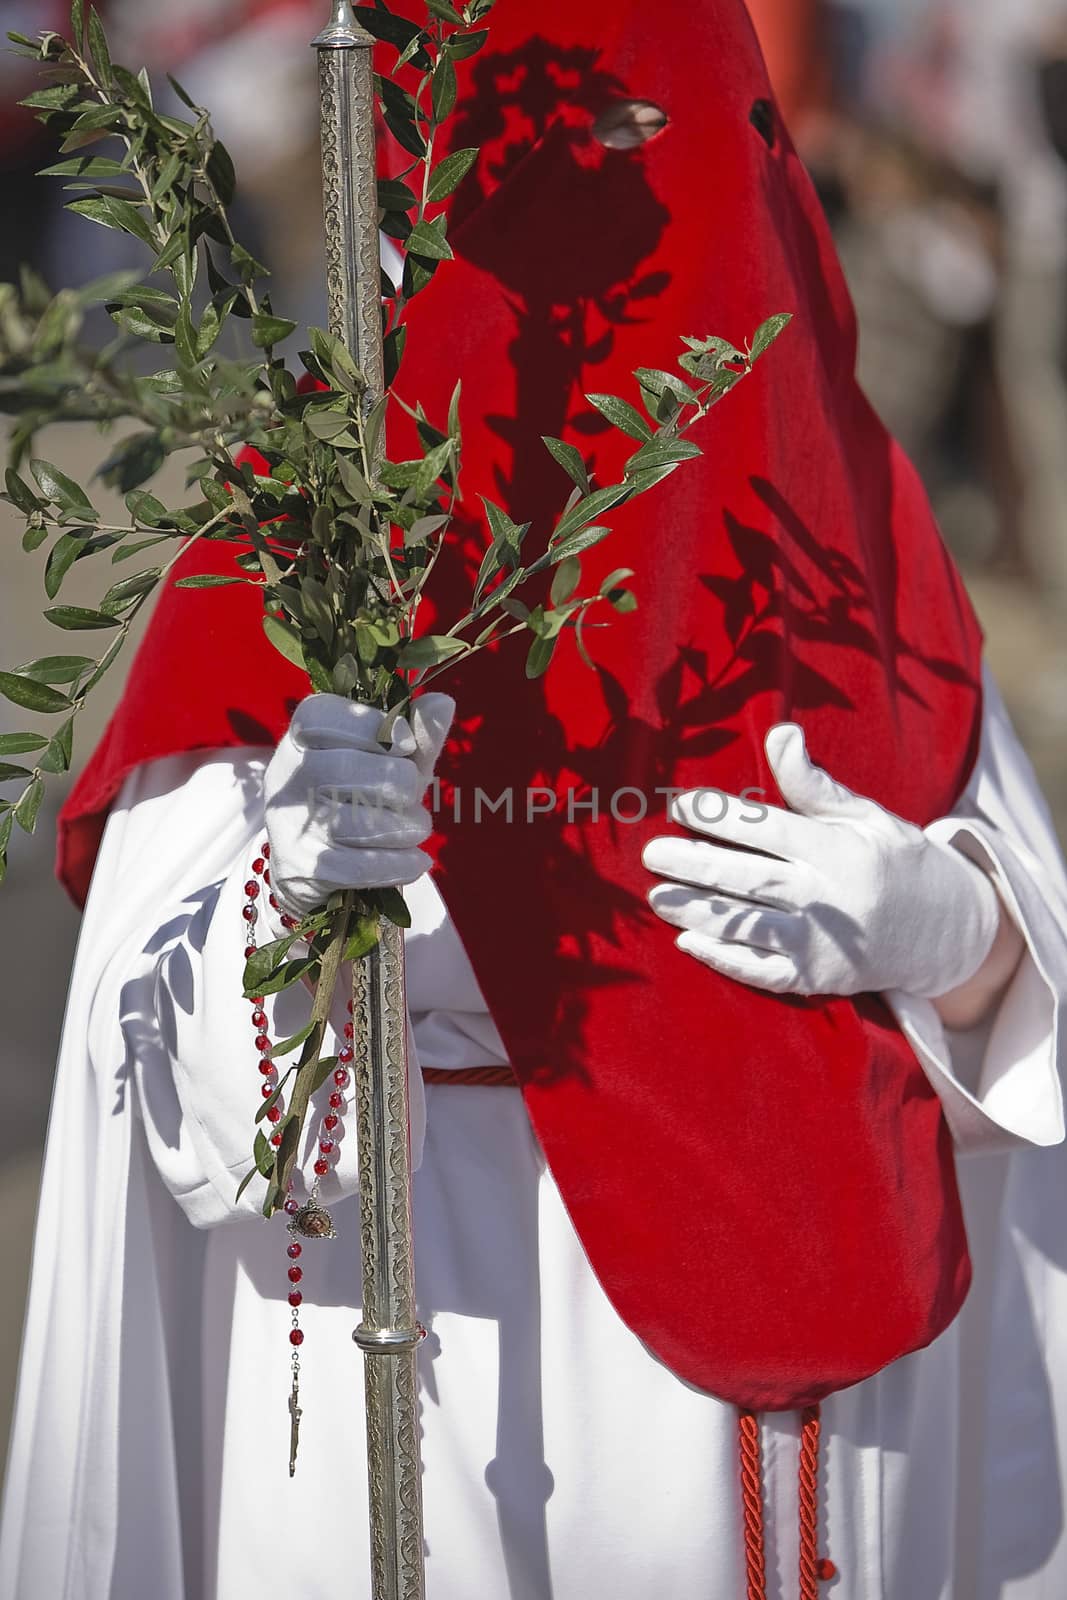 Penitent with a crosier carried olive branches during a procession of holy week on Palm Sunday, Spain